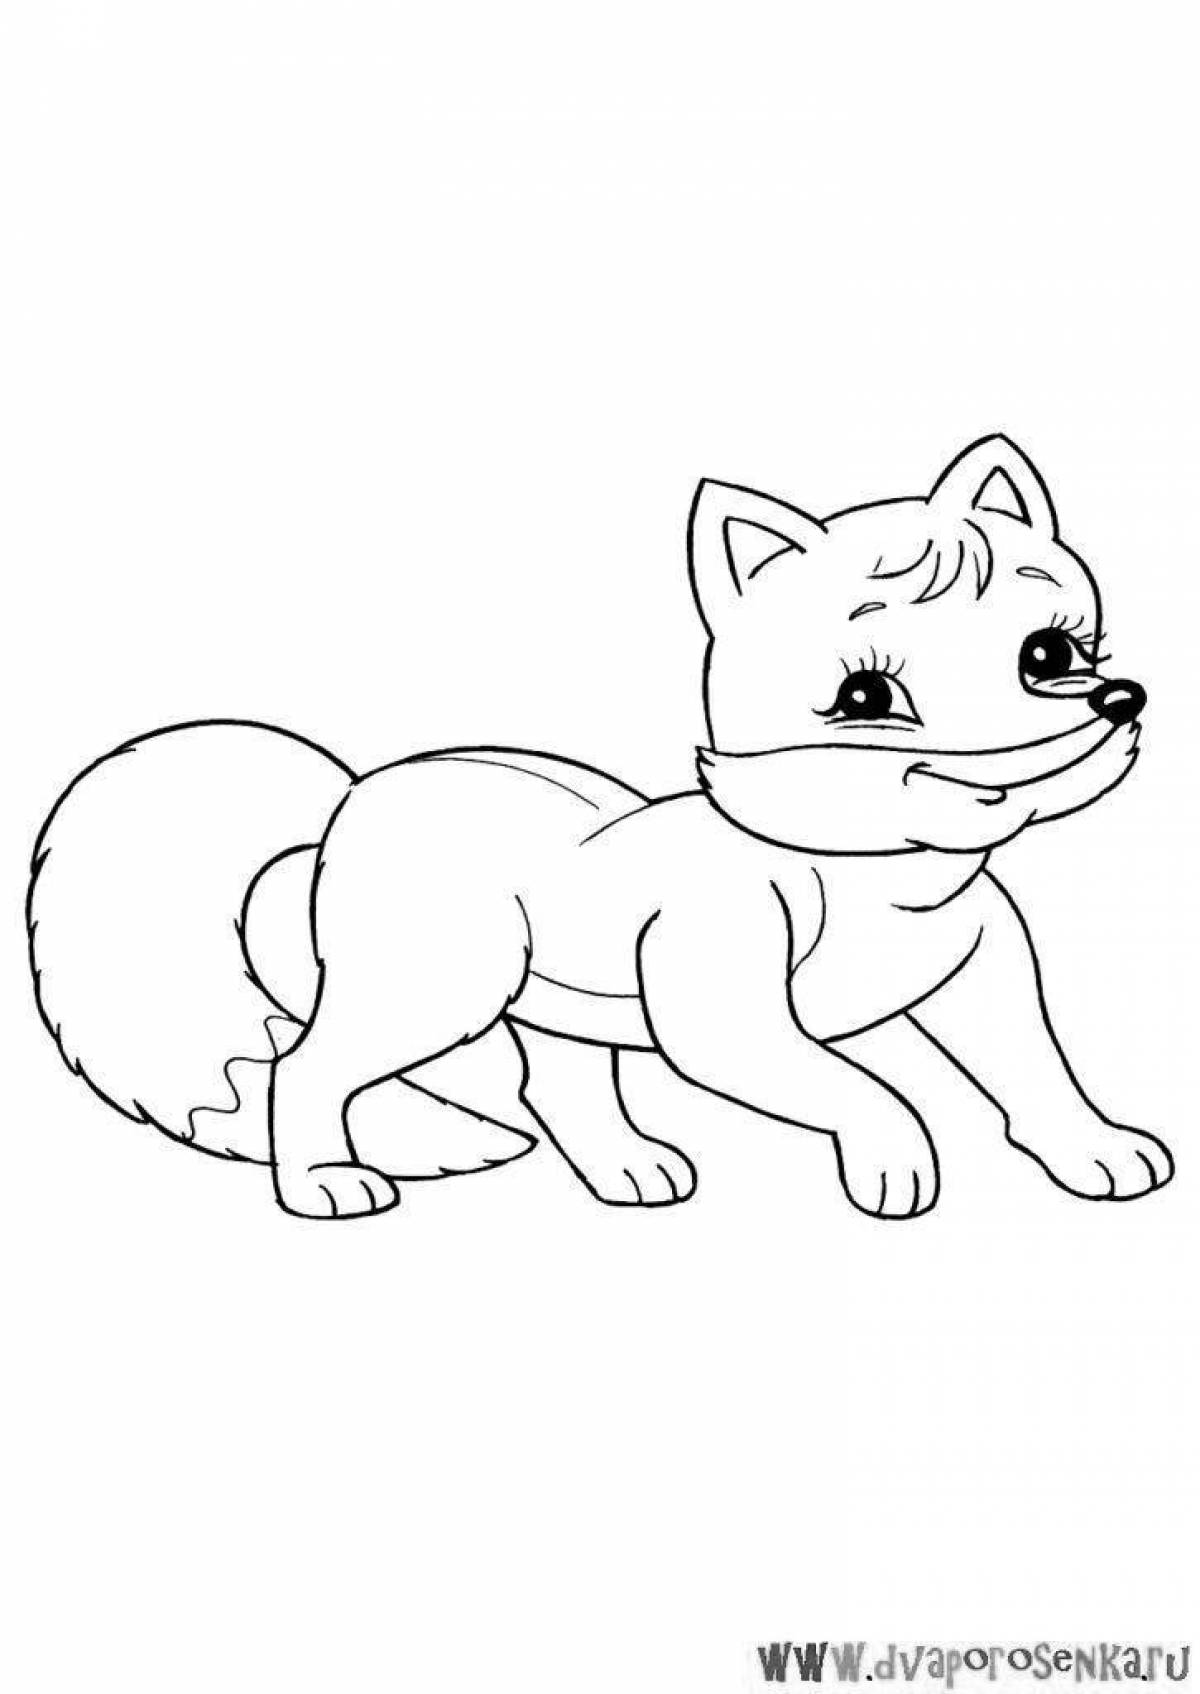 Cute fox coloring for kids